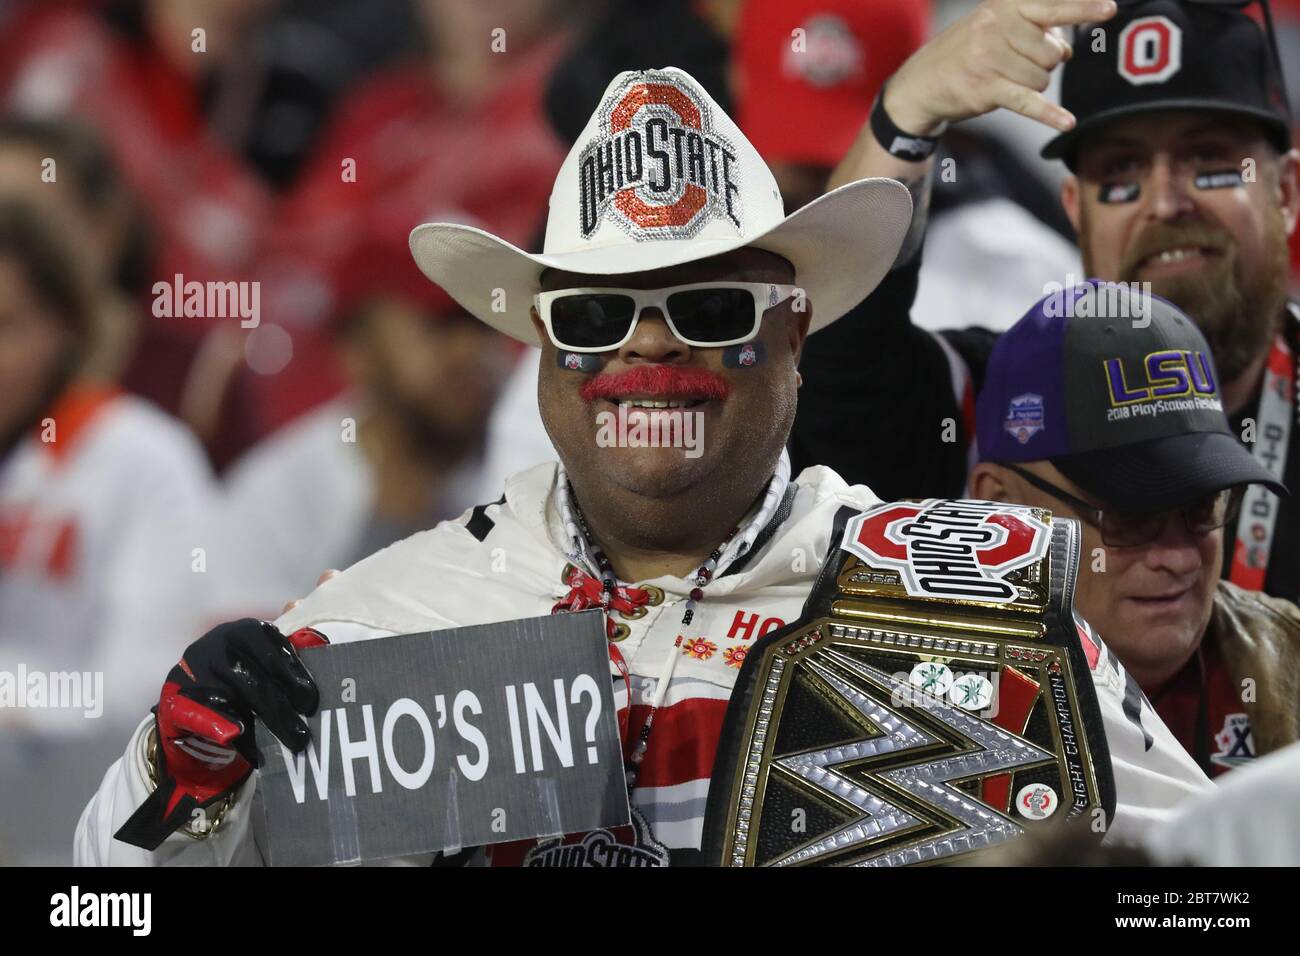 Passionate Ohio State Buckeye football fan at the 2019 College Football Playoff semifinal football game in the Fiesta Bowl in Phoenix, Arizona. Stock Photo